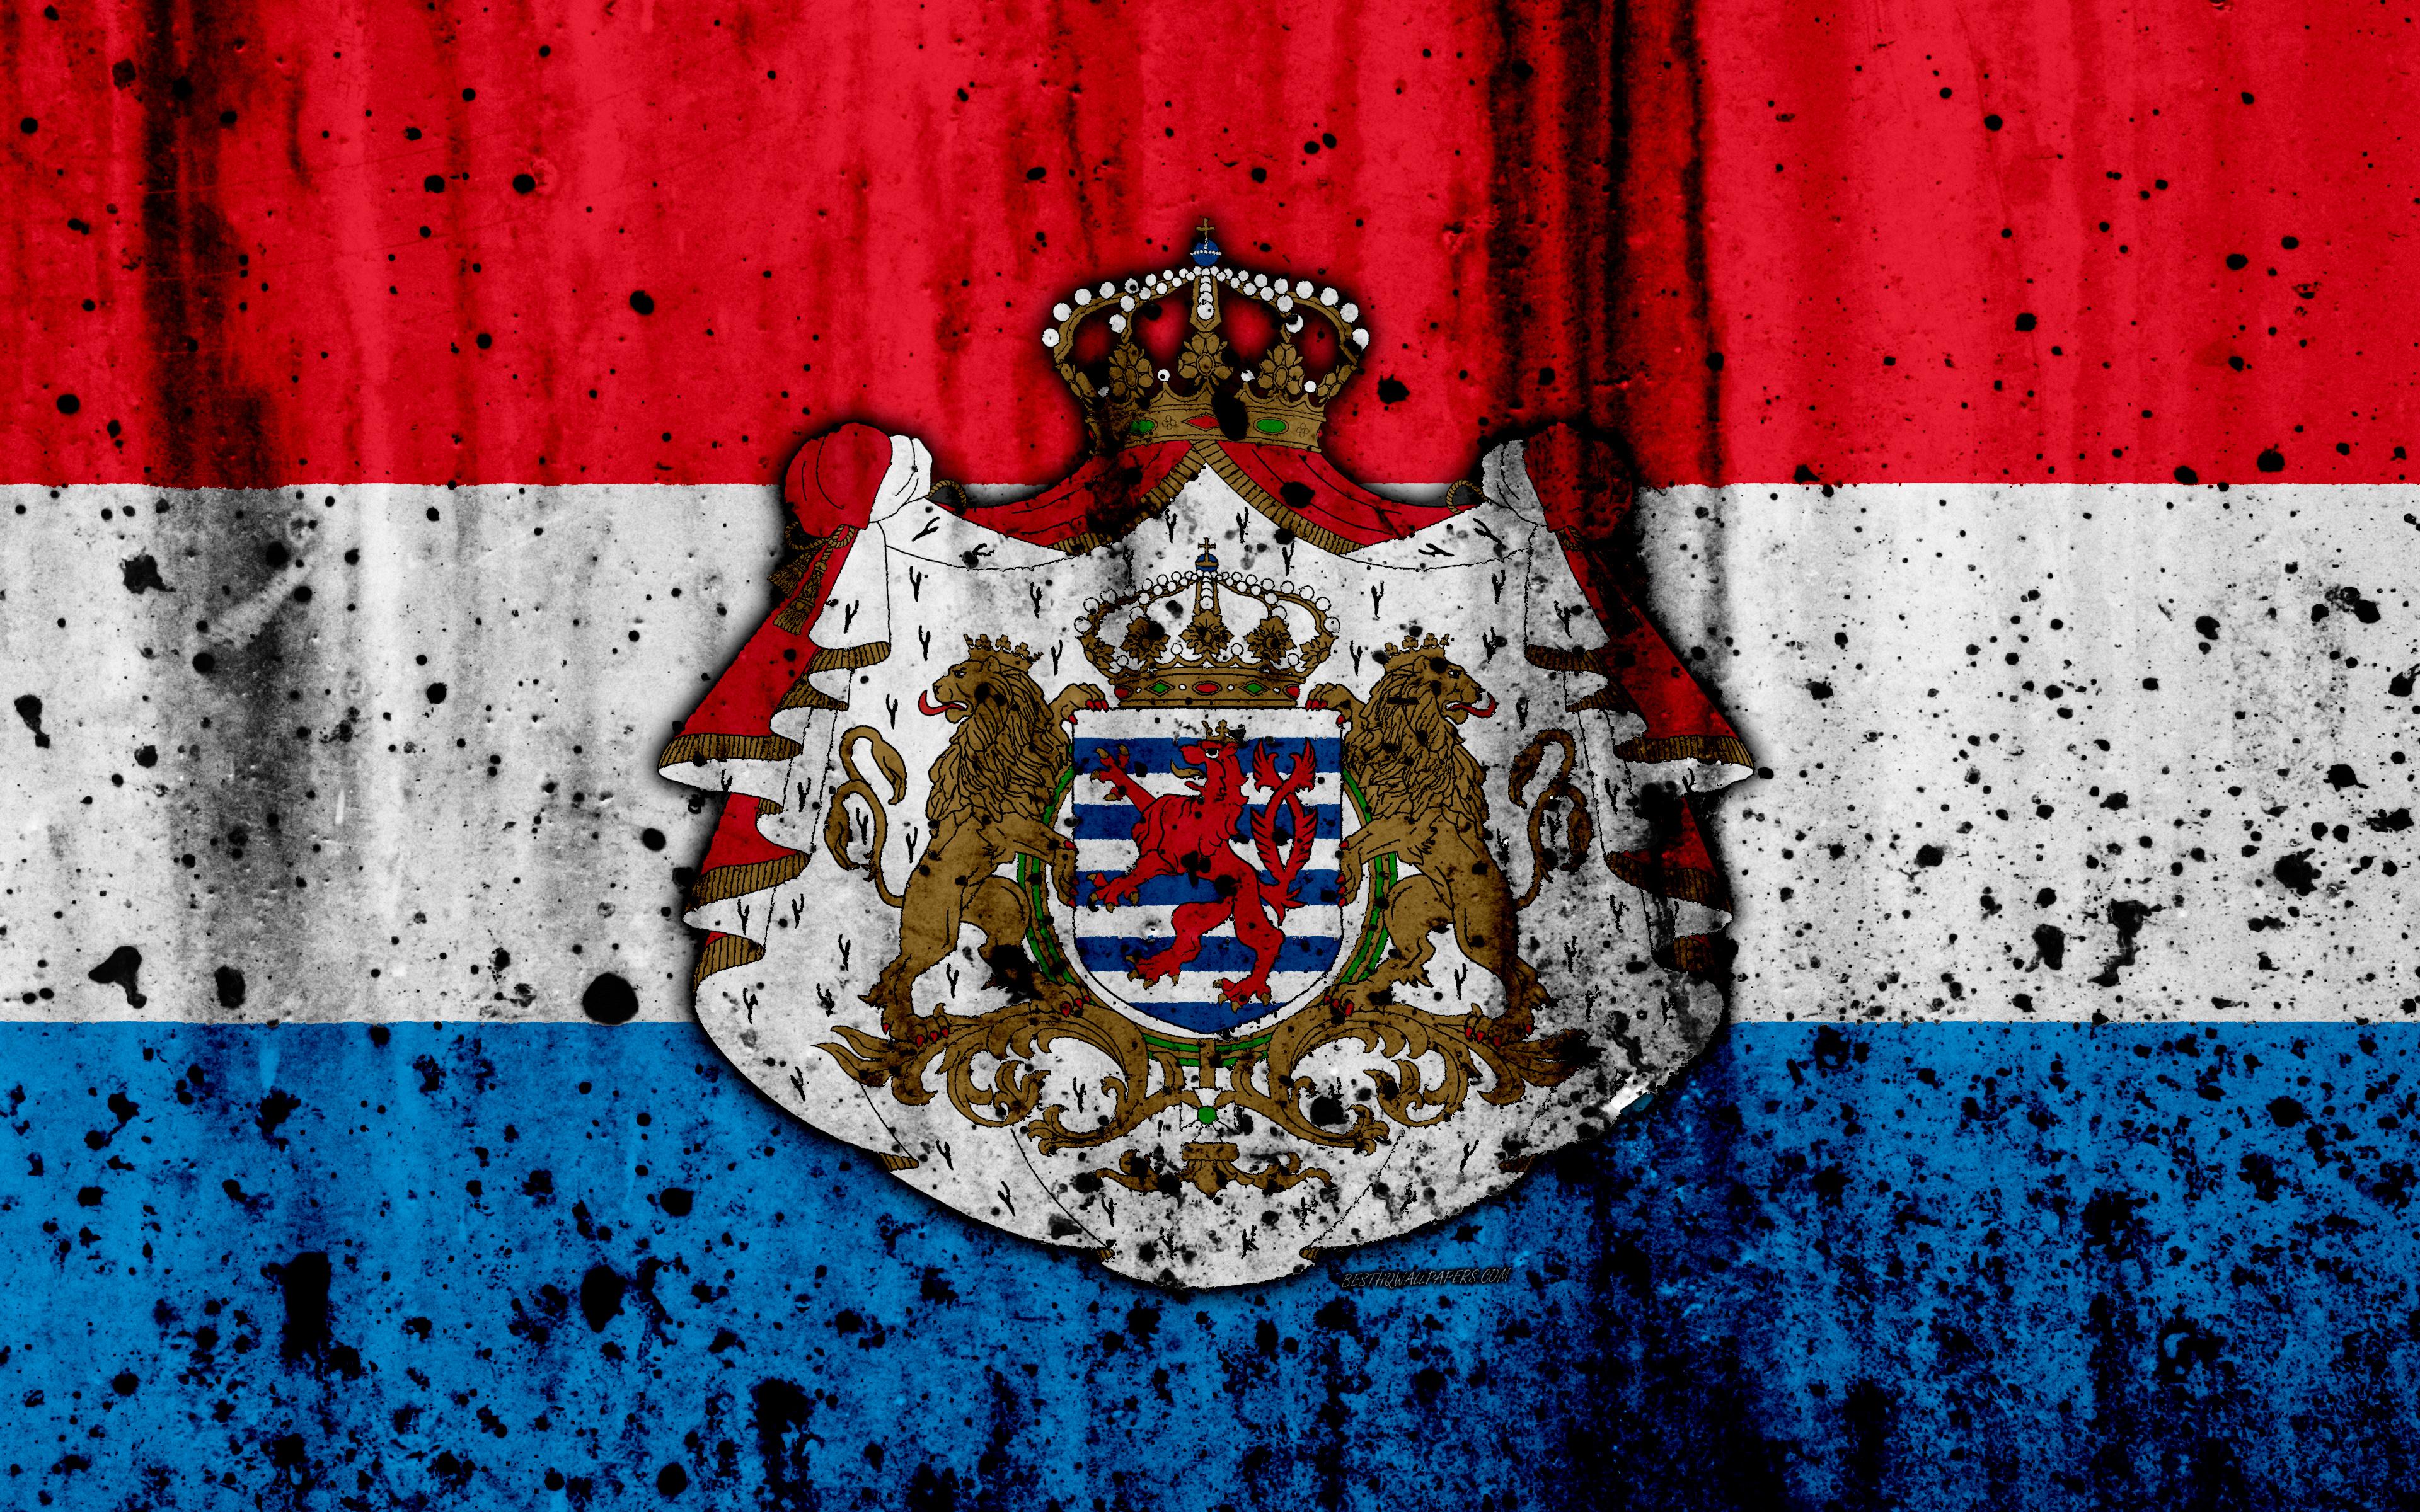 Download wallpaper Luxembourg flag, 4k, grunge, flag of Luxembourg